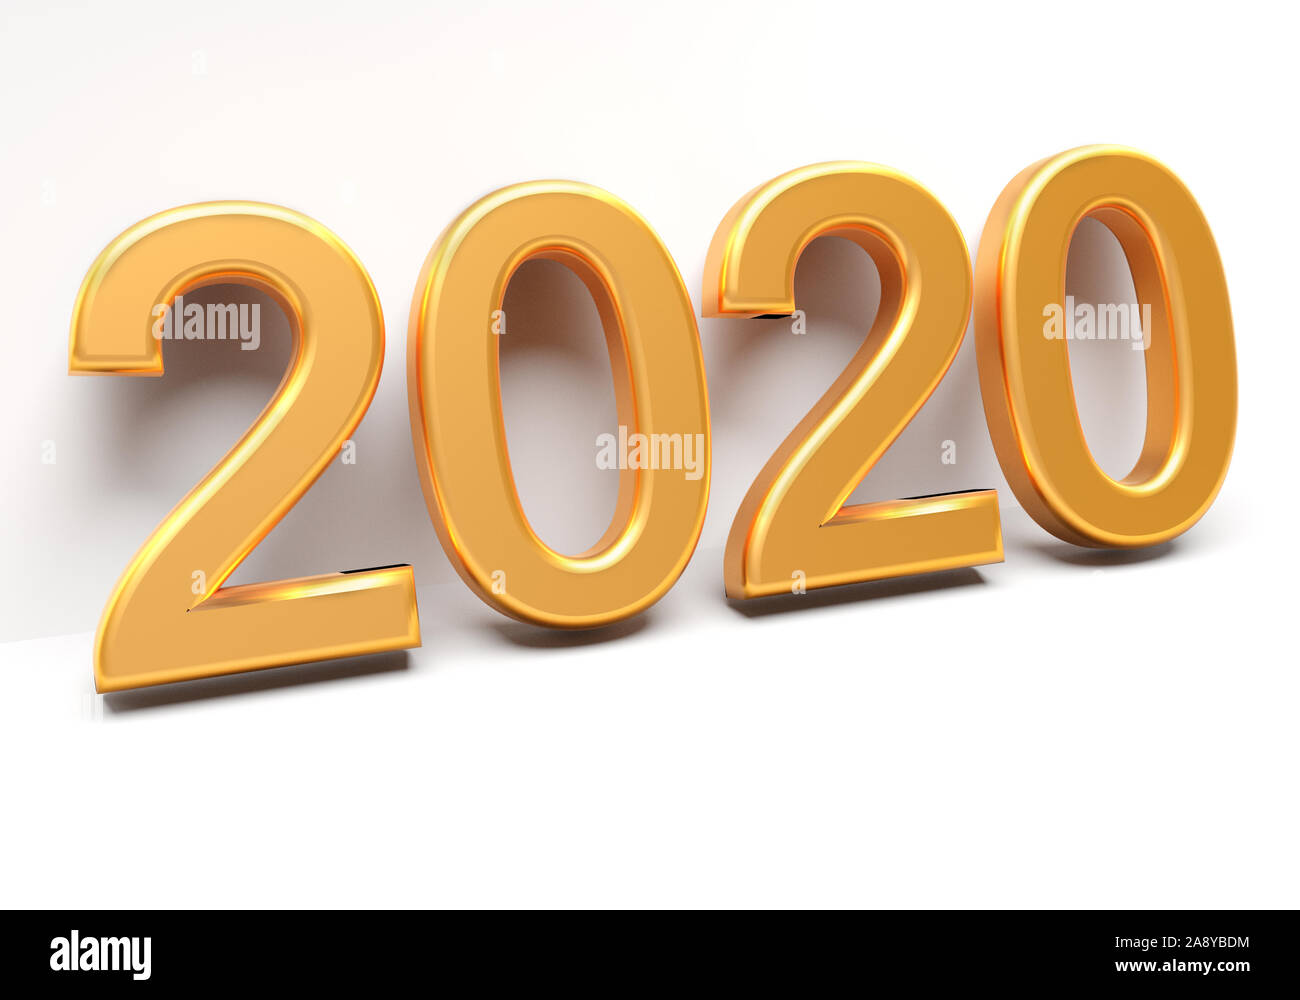 Gold numbers of New Year 2020 with shadow. 3d render Stock Photo